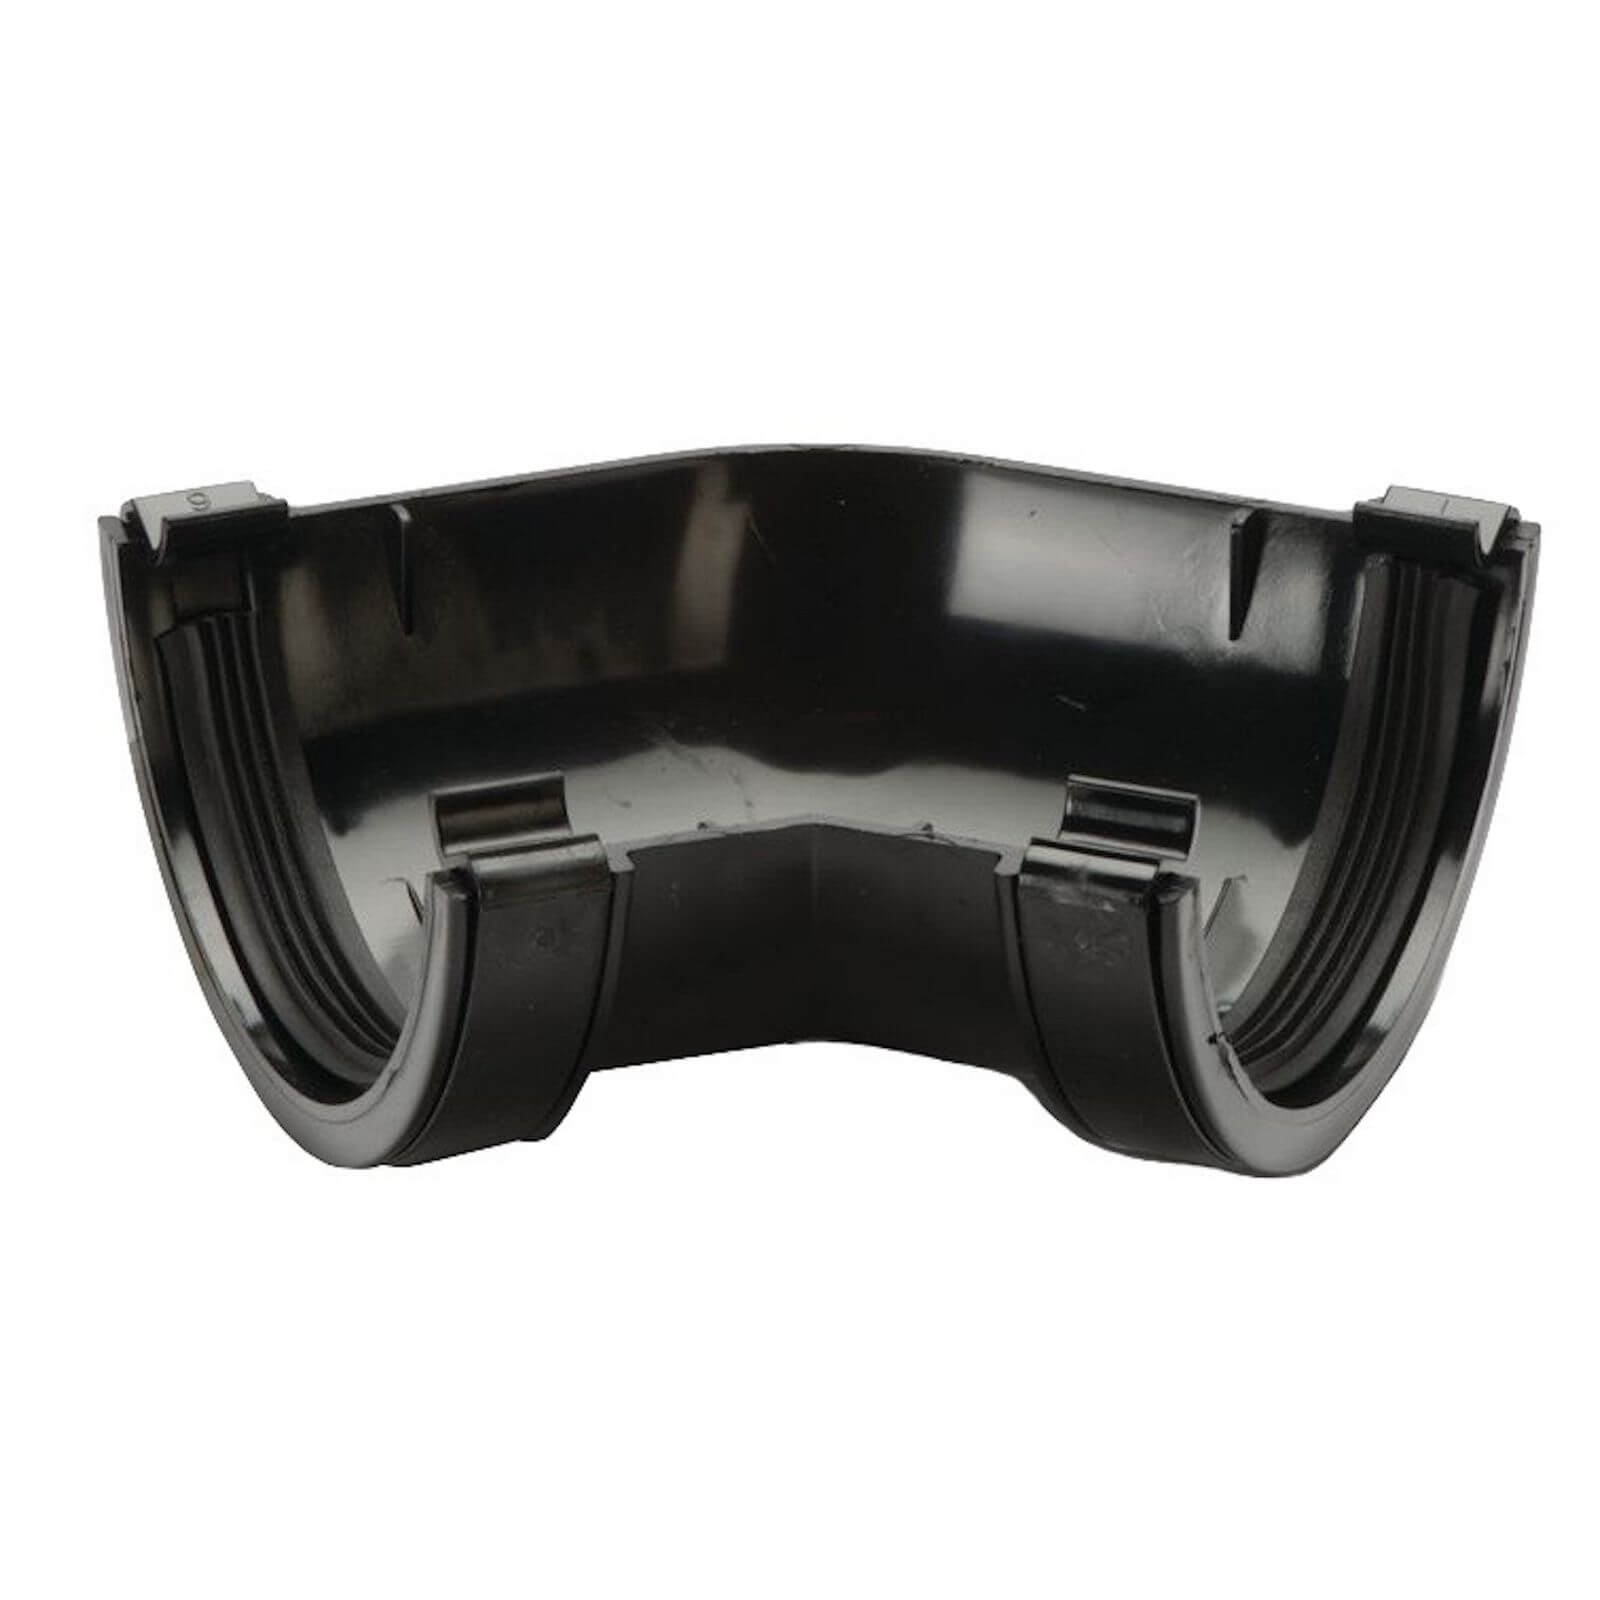 Polypipe Half Round Gutter Angle - 112mm x 135 Degree - Black